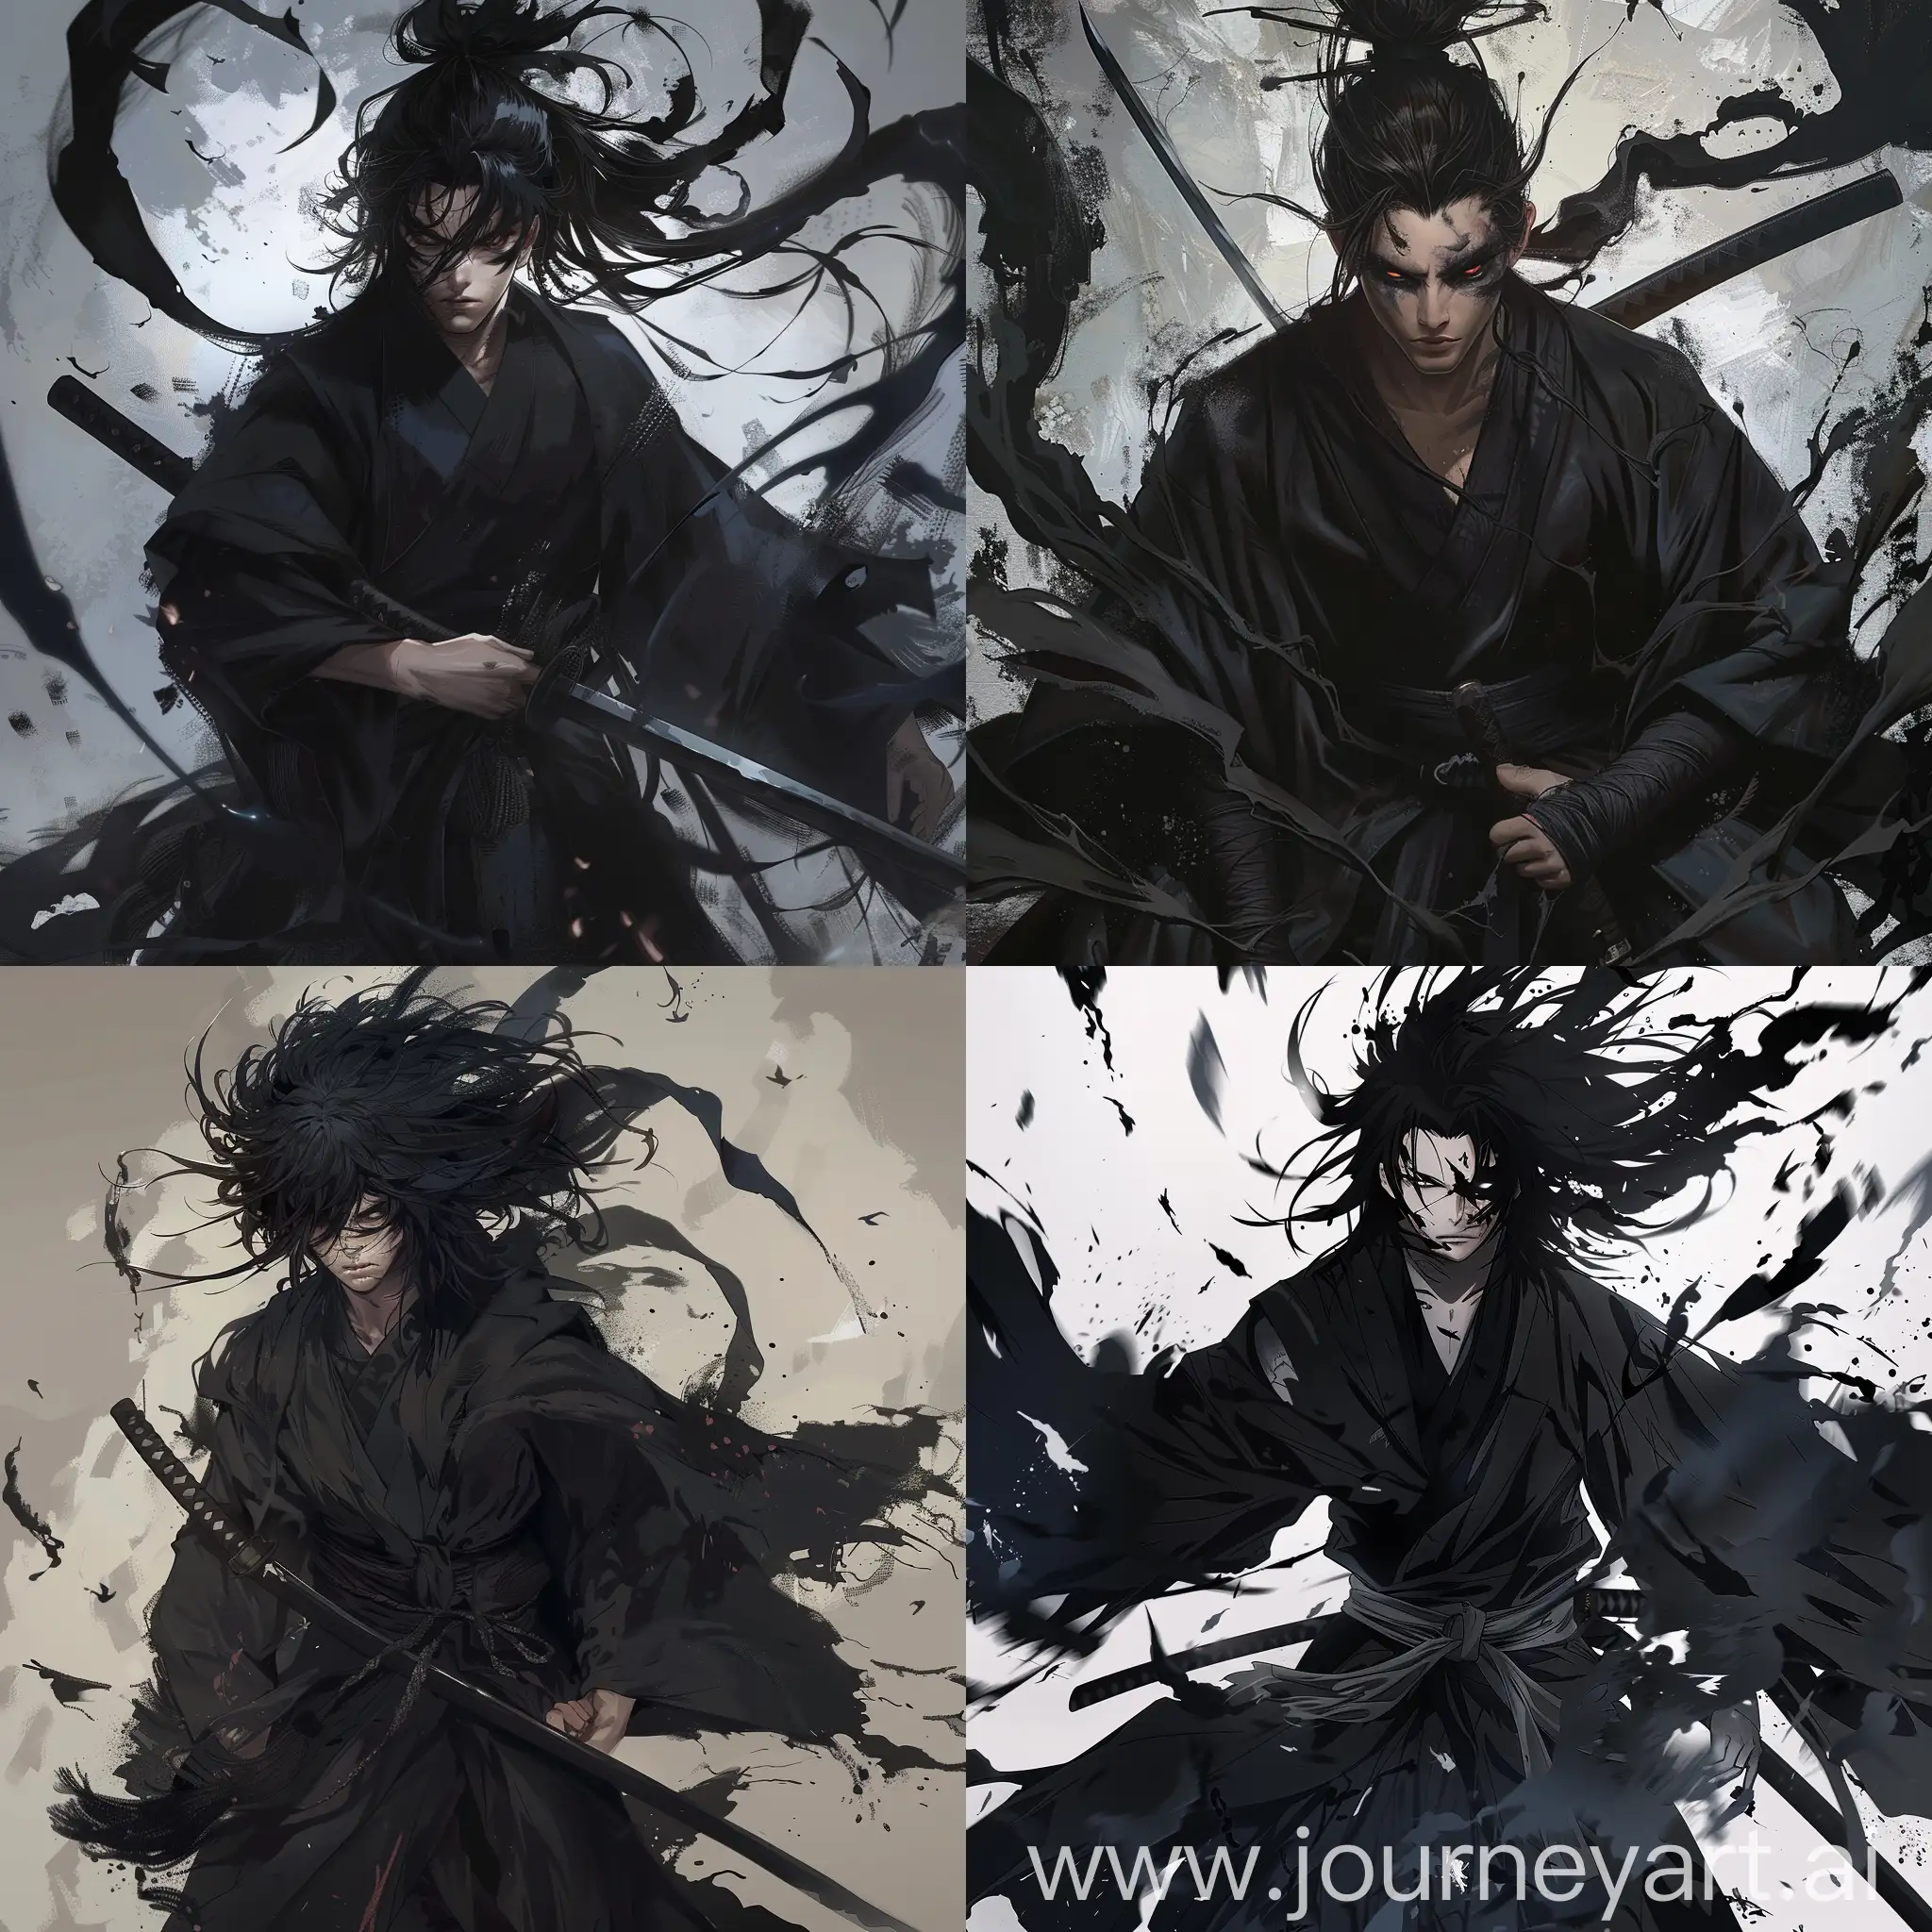 Black haired male, full body, black kimono, black katana, vagabond manga style, surrounded by shadows, anger and sadness, oni mask, shadows leaking from he blade, death stare, oni, vengeance